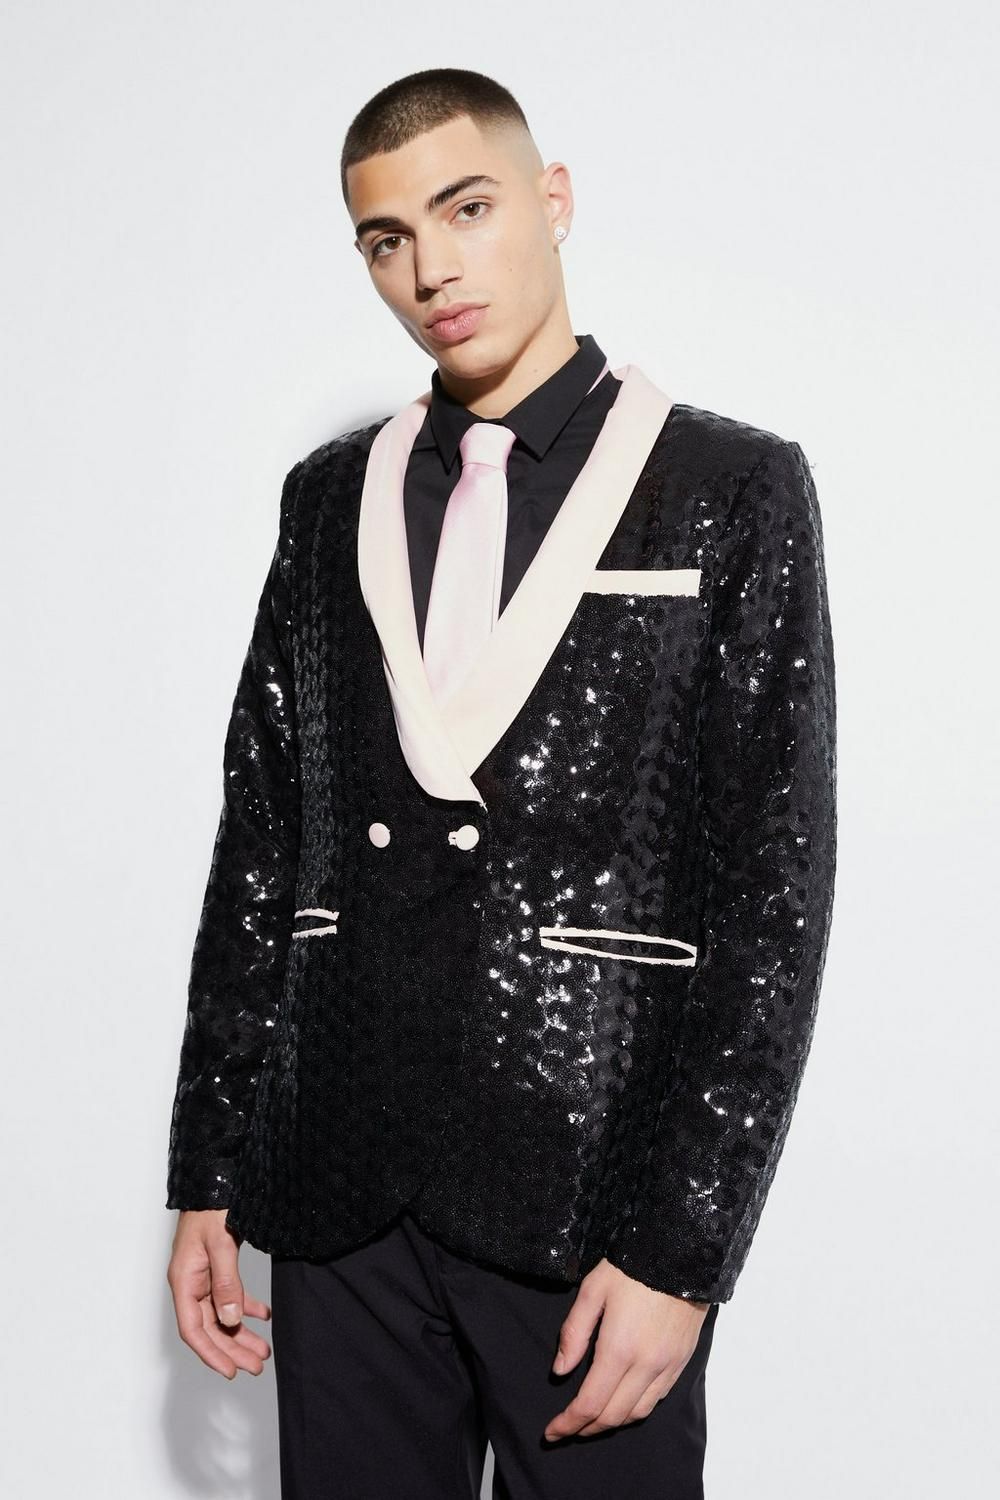 COMING SOON! Black Slim Double Breasted Sequin Suit Jacket